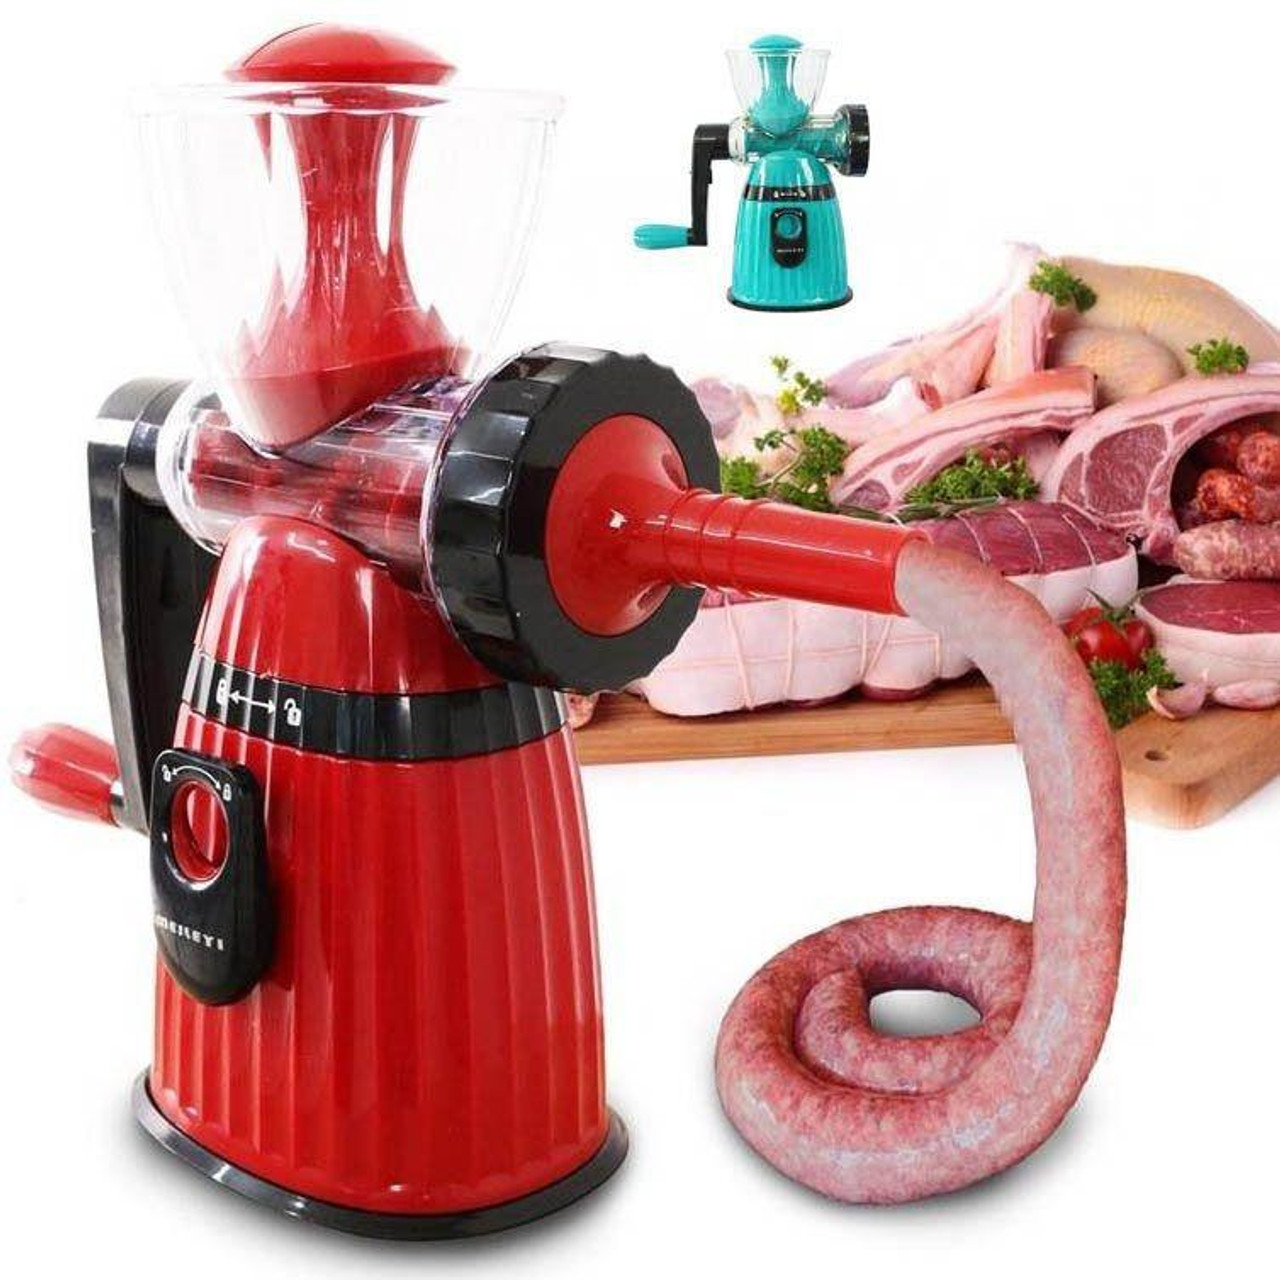 https://cdn11.bigcommerce.com/s-yvpirc28f4/images/stencil/1280x1280/products/41581/73309/hand-crank-manual-meat-grinder-snatcher-online-shopping-south-africa-17856414089375__90299.1629240236.jpg?c=1&imbypass=on